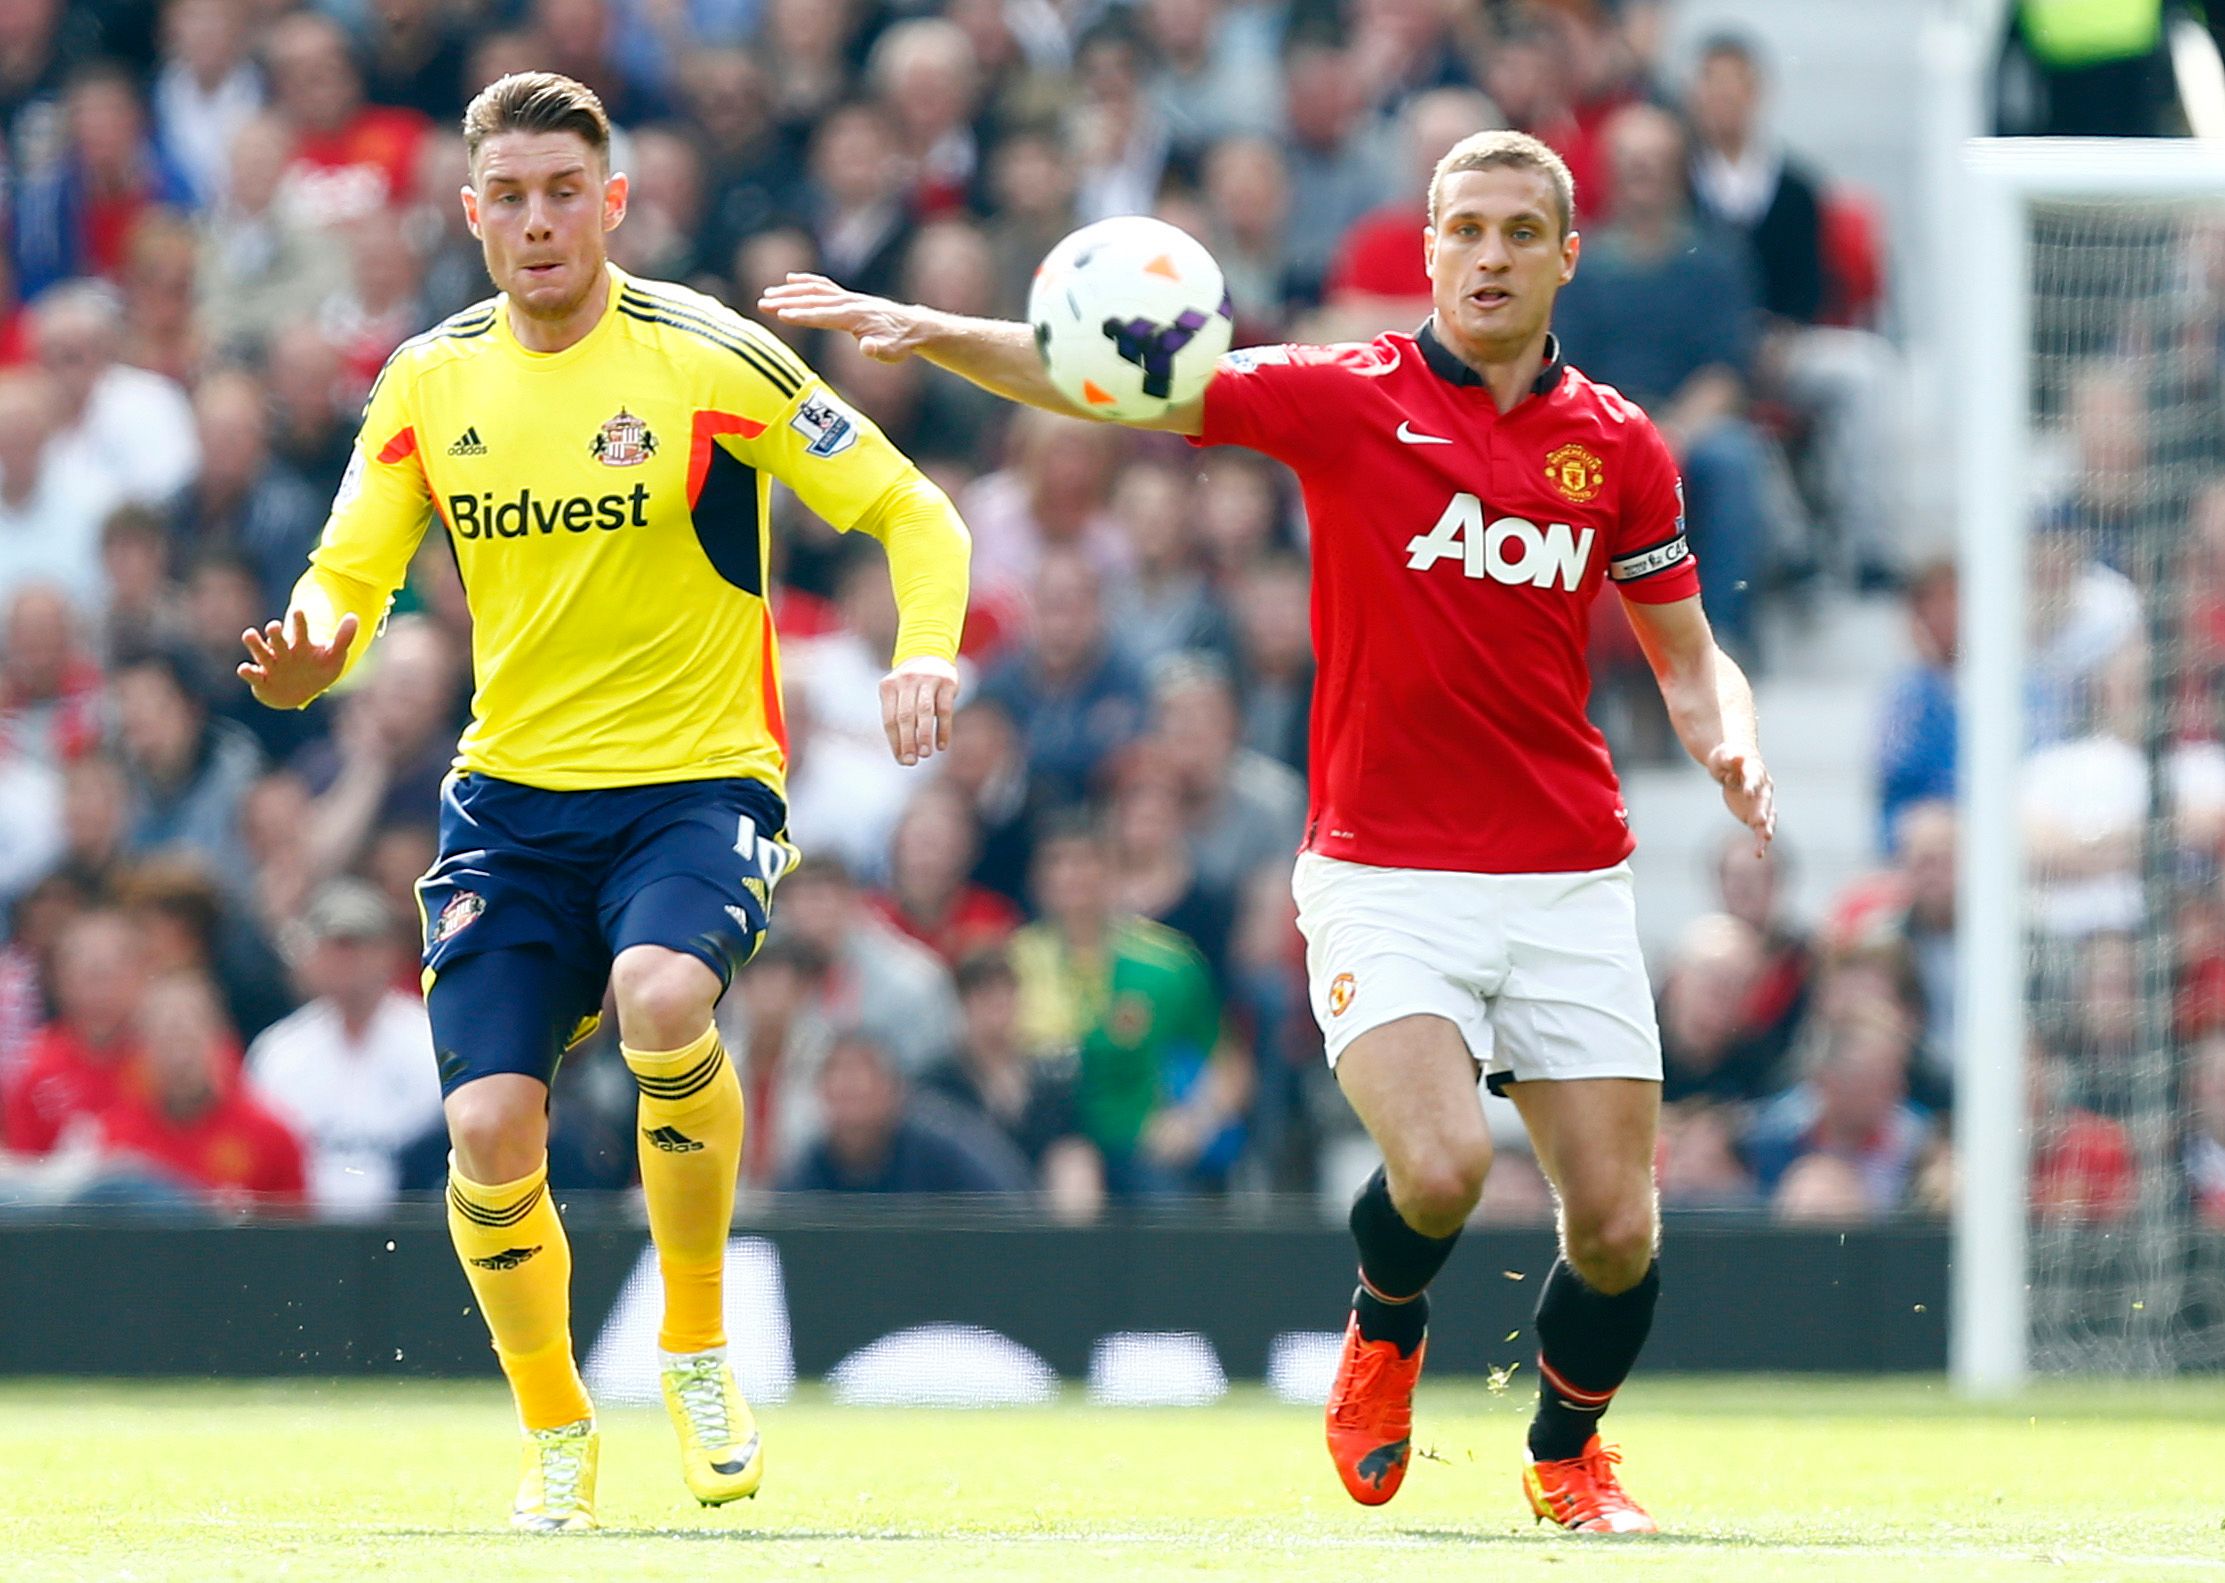 Football - Manchester United v Sunderland - Barclays Premier League - Old Trafford  - 3/5/14 
Manchester United's Nemanja Vidic (R) and Sunderland's Connor Wickham in action 
Mandatory Credit: Action Images / Jason Cairnduff 
Livepic 
EDITORIAL USE ONLY. No use with unauthorized audio, video, data, fixture lists, club/league logos or 